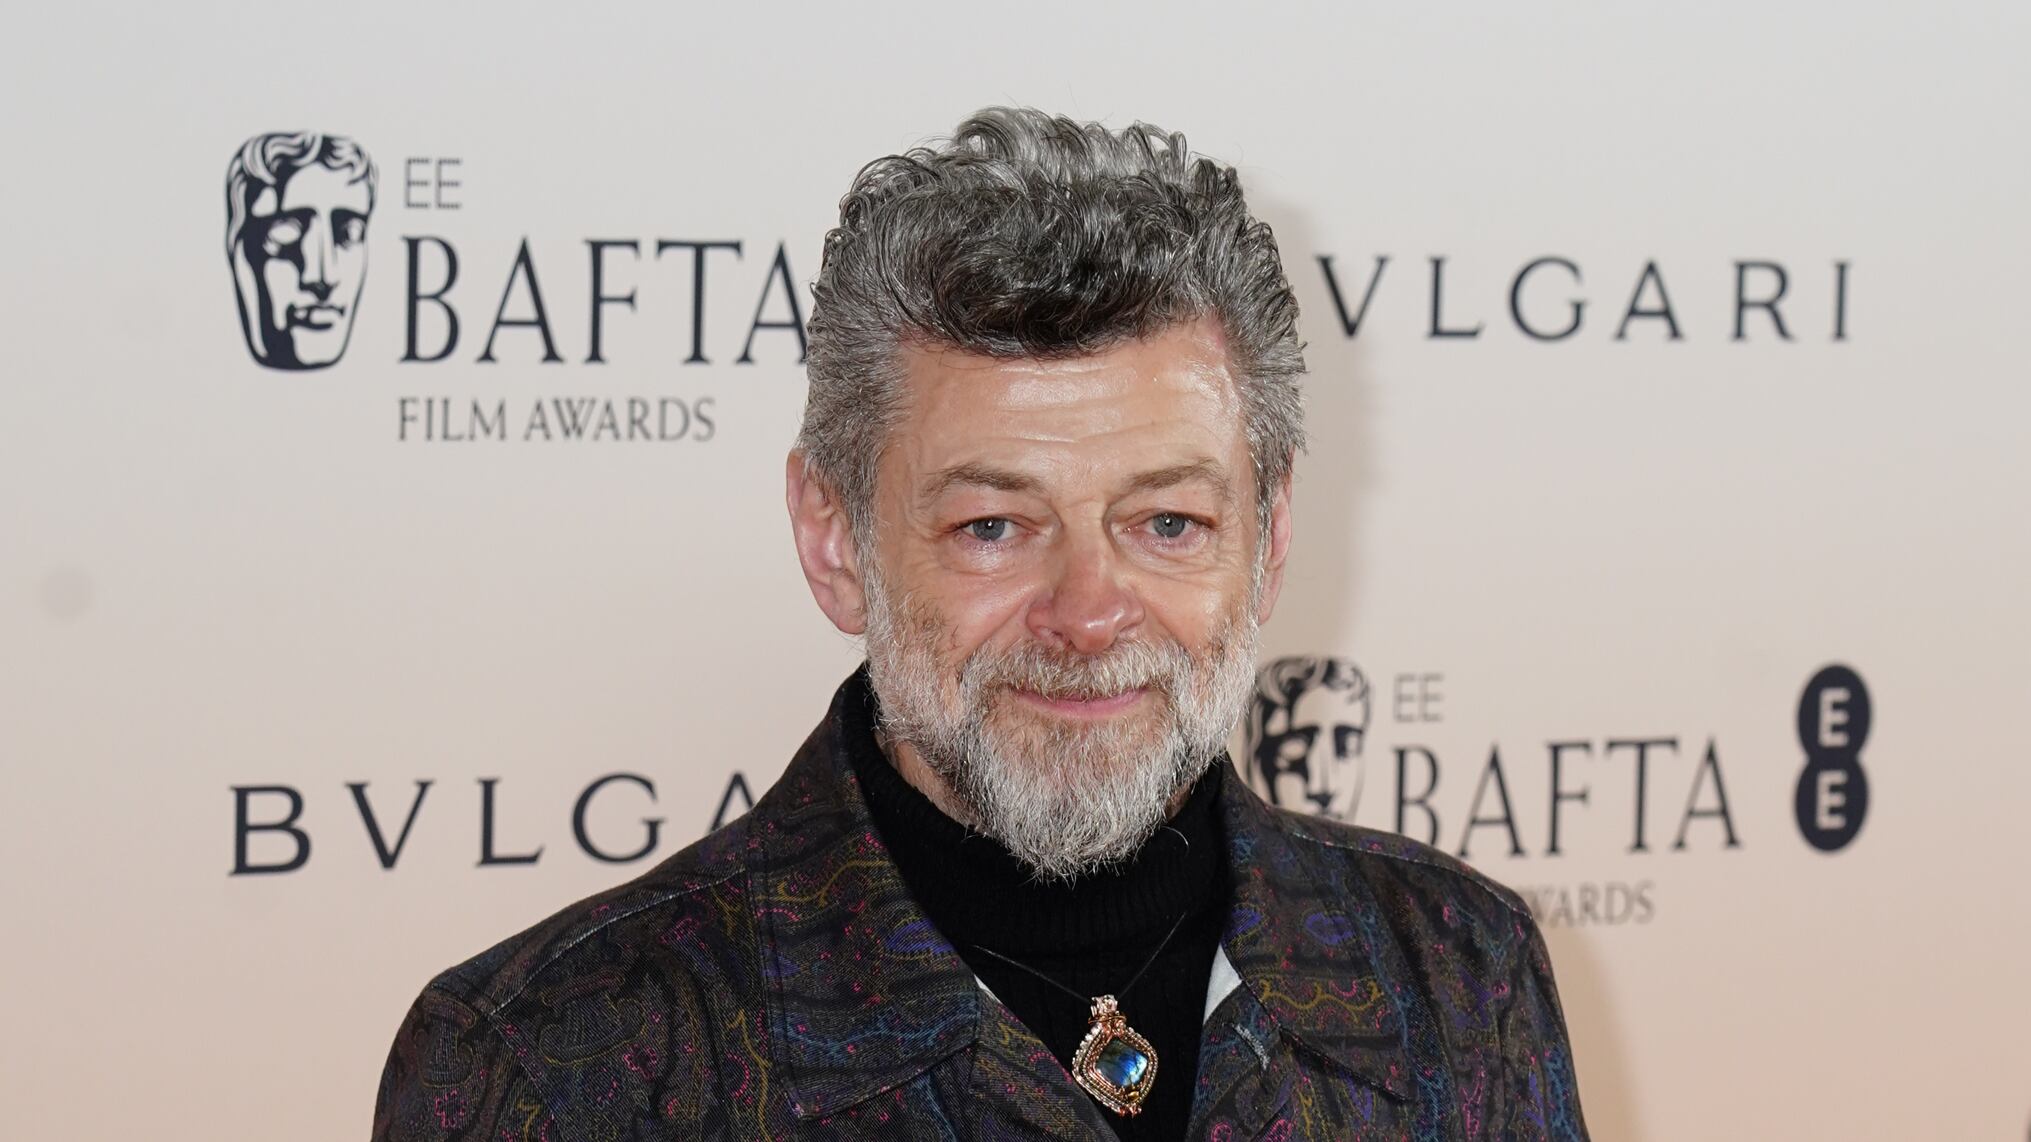 Andy Serkis is best known for his groundbreaking motion capture work as Gollum in the adaptation of JRR Tolkien’s beloved books